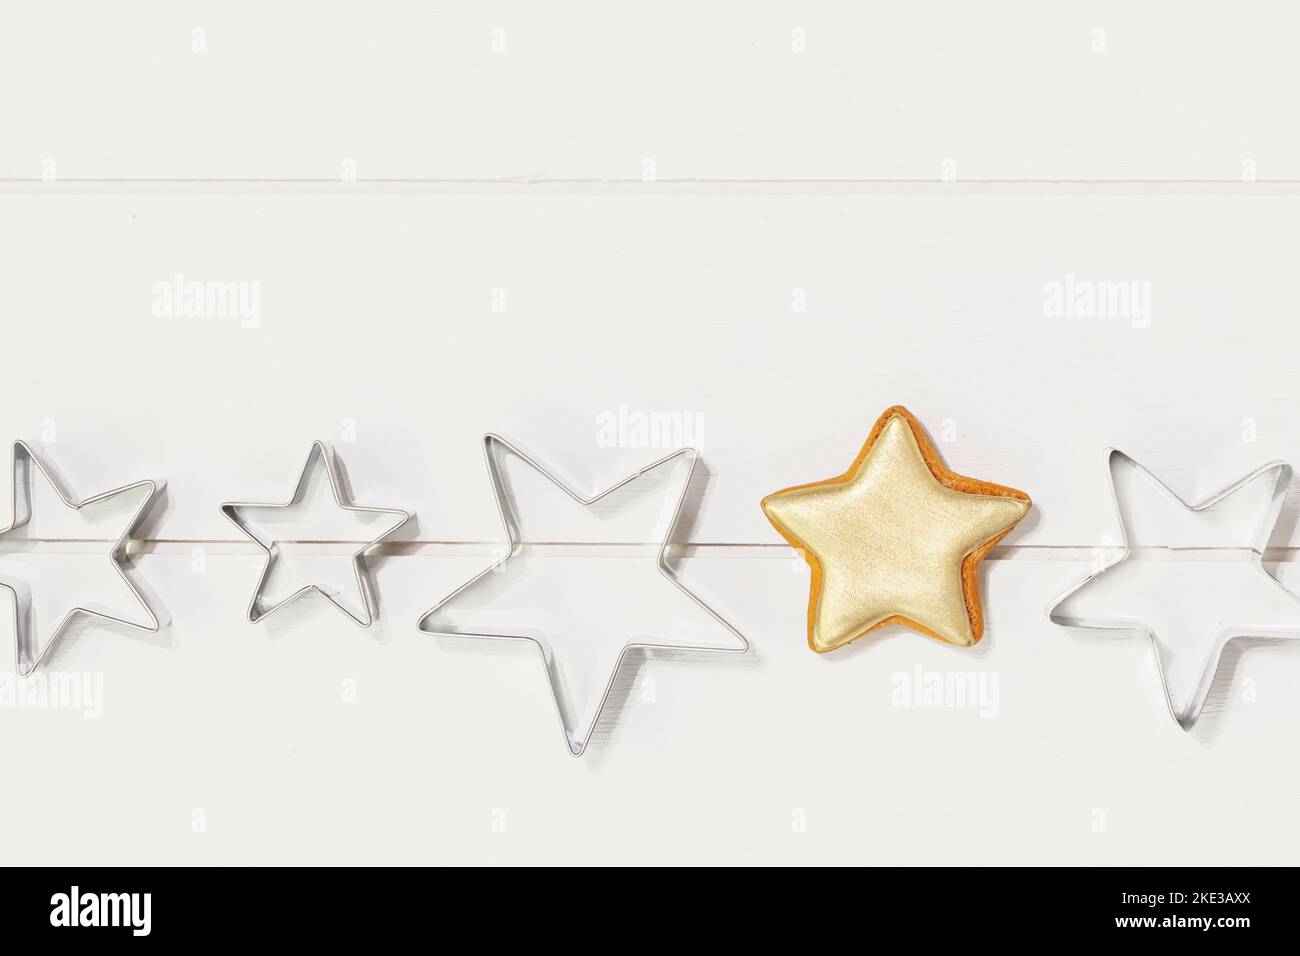 Cooking holiday cookies. Bakery flat lay. Ginger cookie in the form of stars, covered with gold glaze and cookie cutters on a white wooden background. Stock Photo